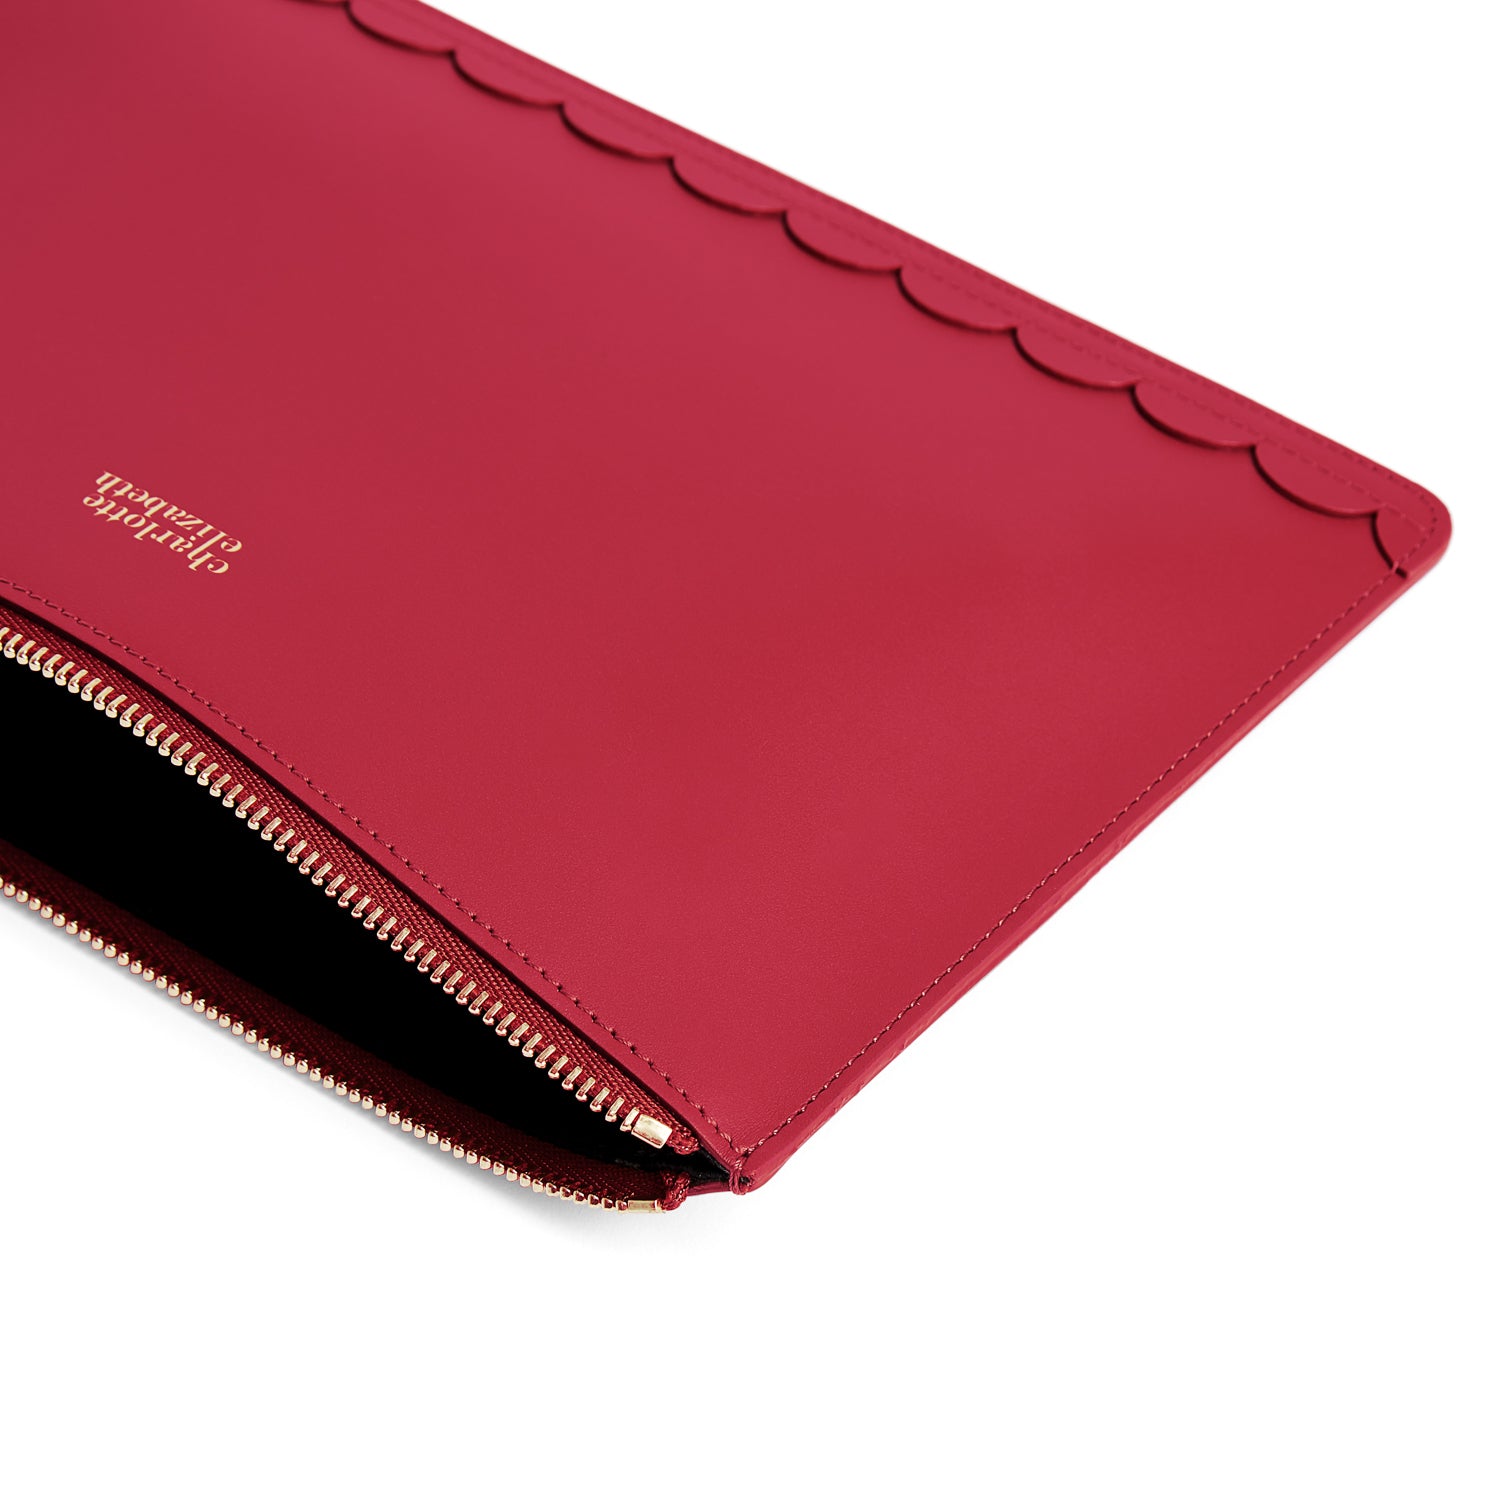 scallop mini clutch bag travel wallet for your essentials. oxblood colour